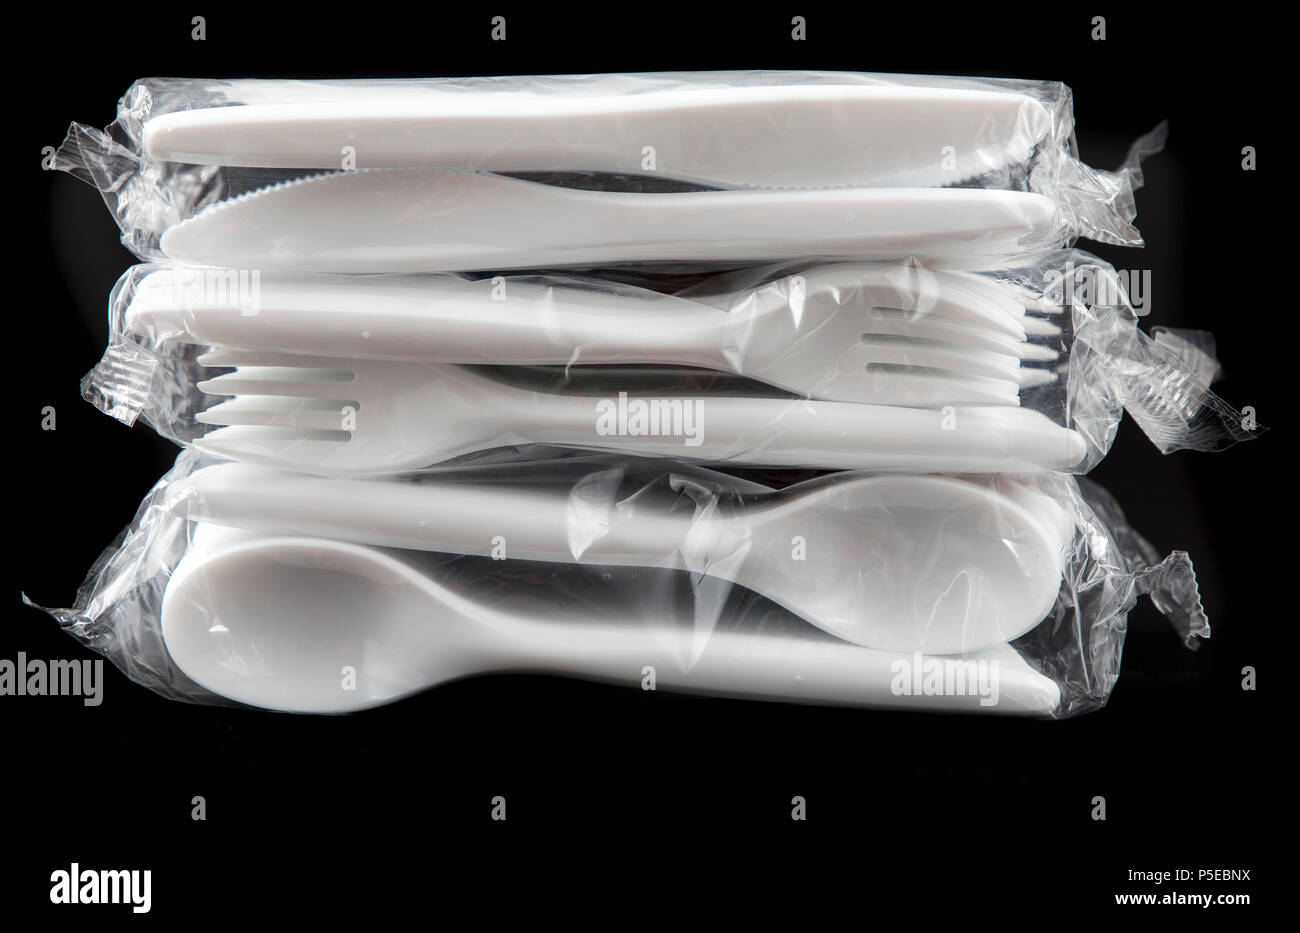 Large pack of plastic cutlery, disposable cutlery, knives, forks, spoons, plastic waste, Stock Photo